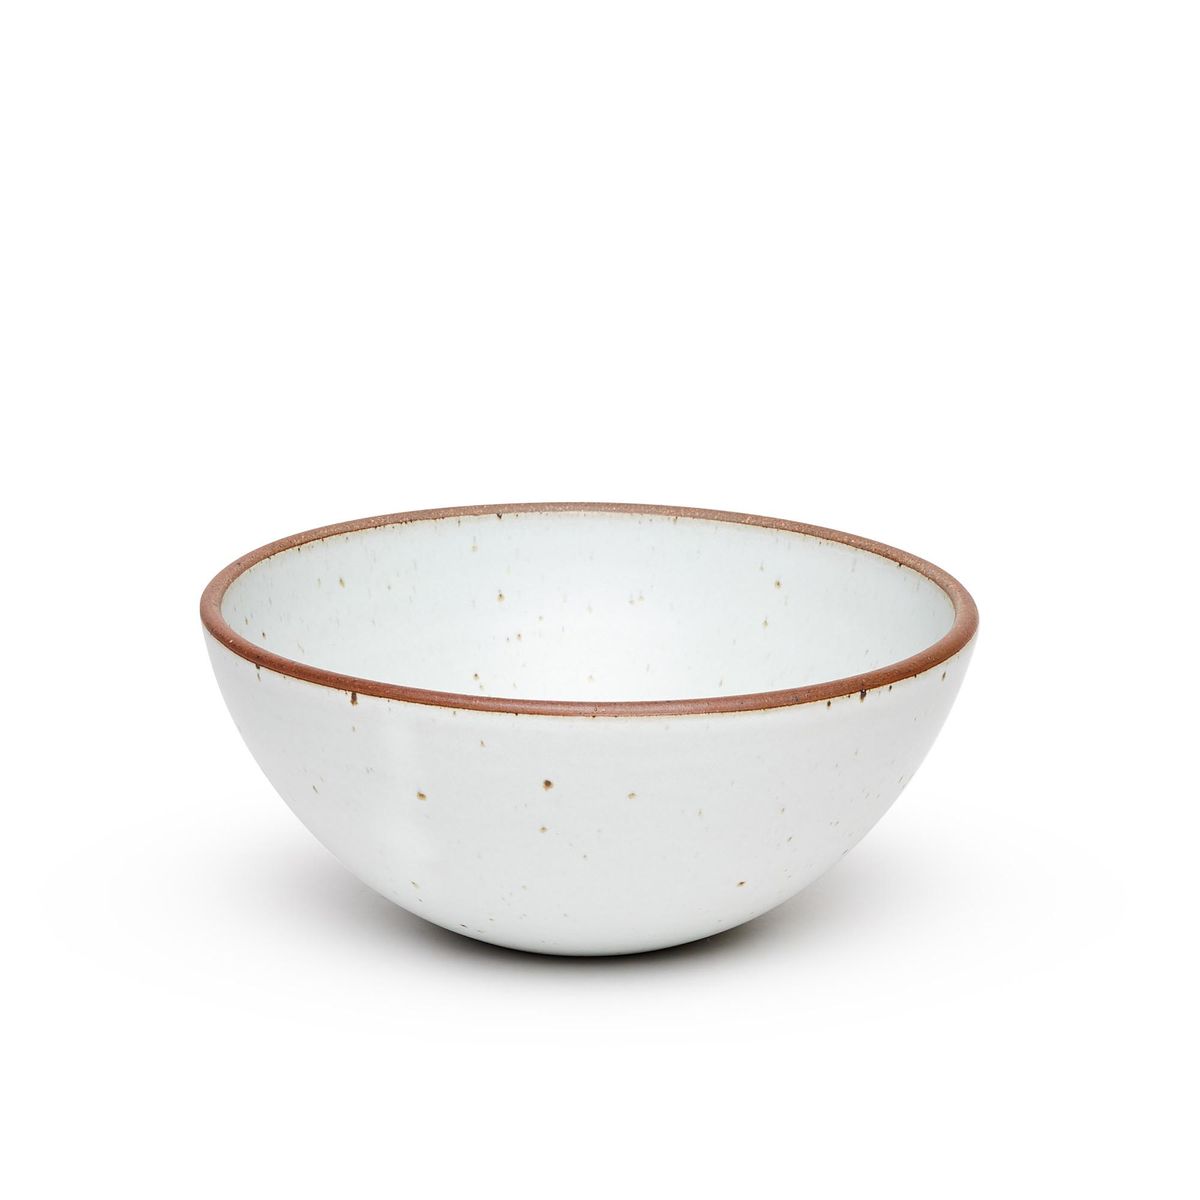 A large rounded ceramic bowl in a cool white color featuring iron speckles and an unglazed rim